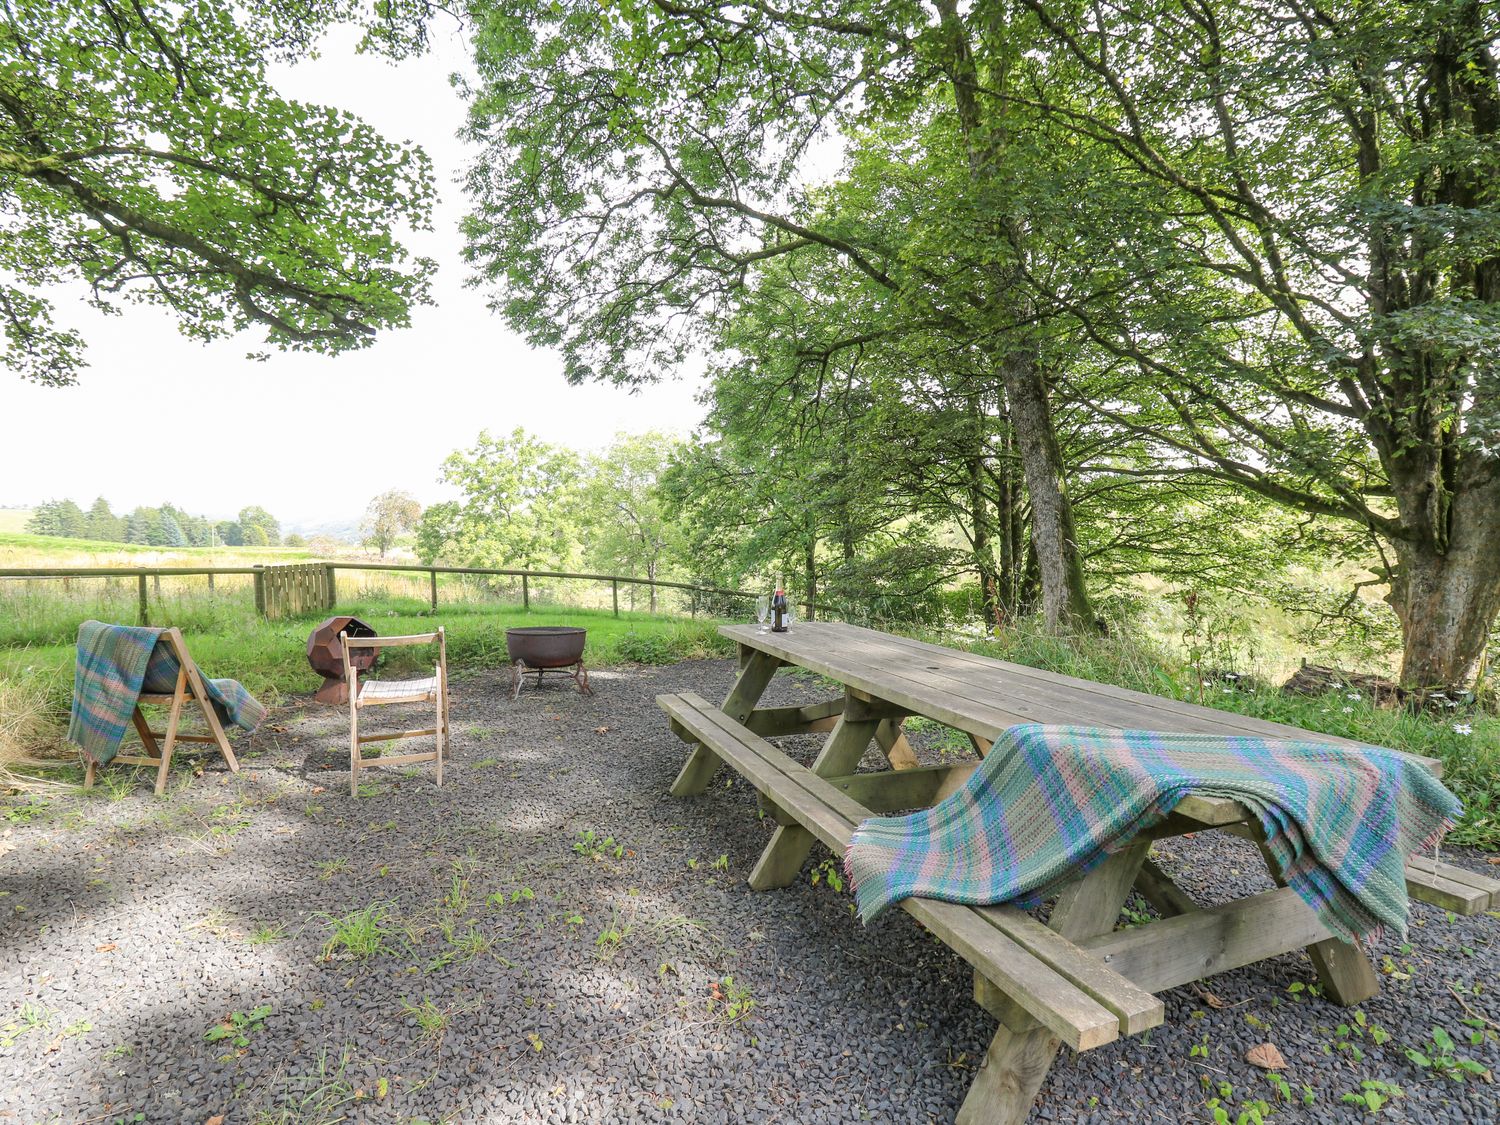 Nanthir nearby Rhayader, Powys. Set in spacious grounds. Over three floors. Five bedrooms & hot tub.